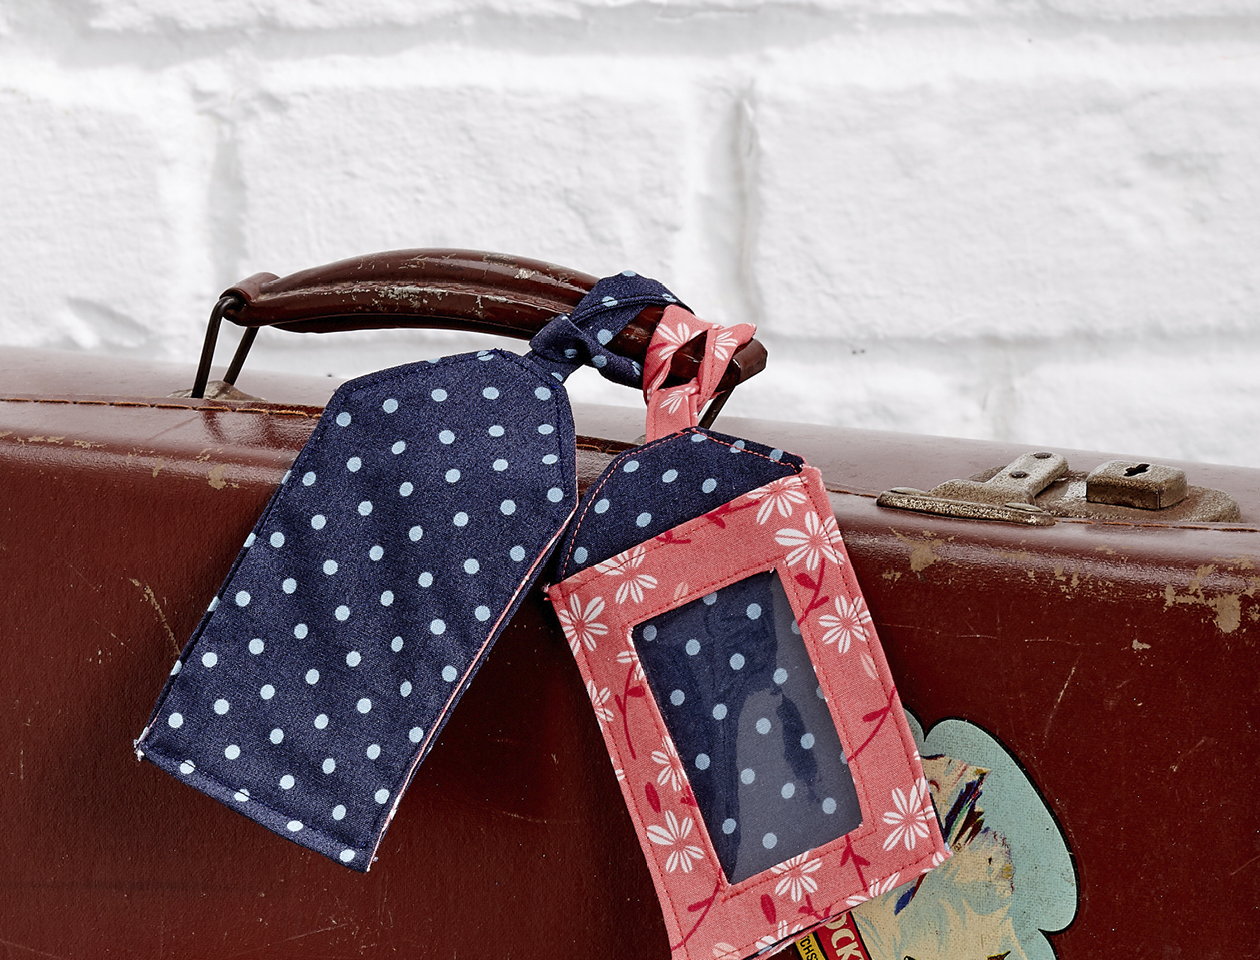 Love Patchwork & Quilting luggage tag tutorial